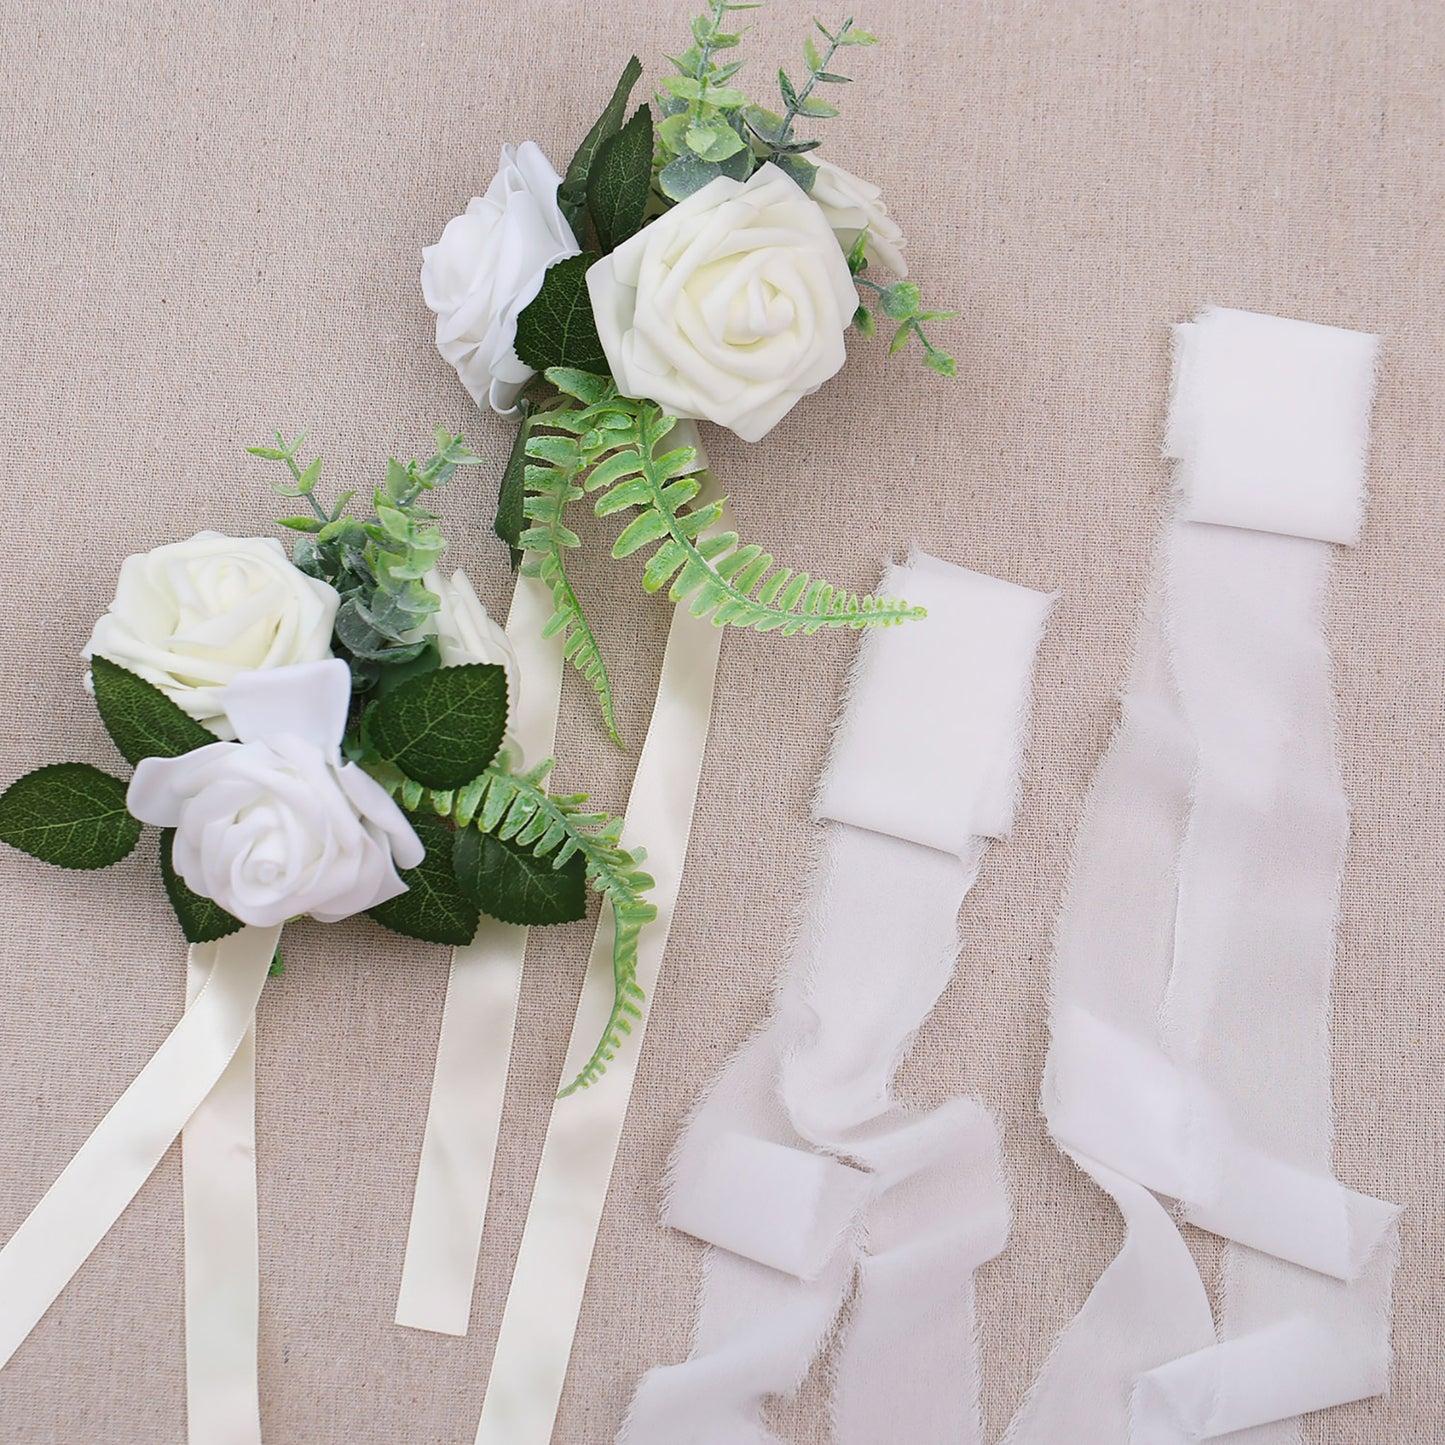 Faneya 12pcs Ivory White Floral Wedding Flower Artificial Flowers